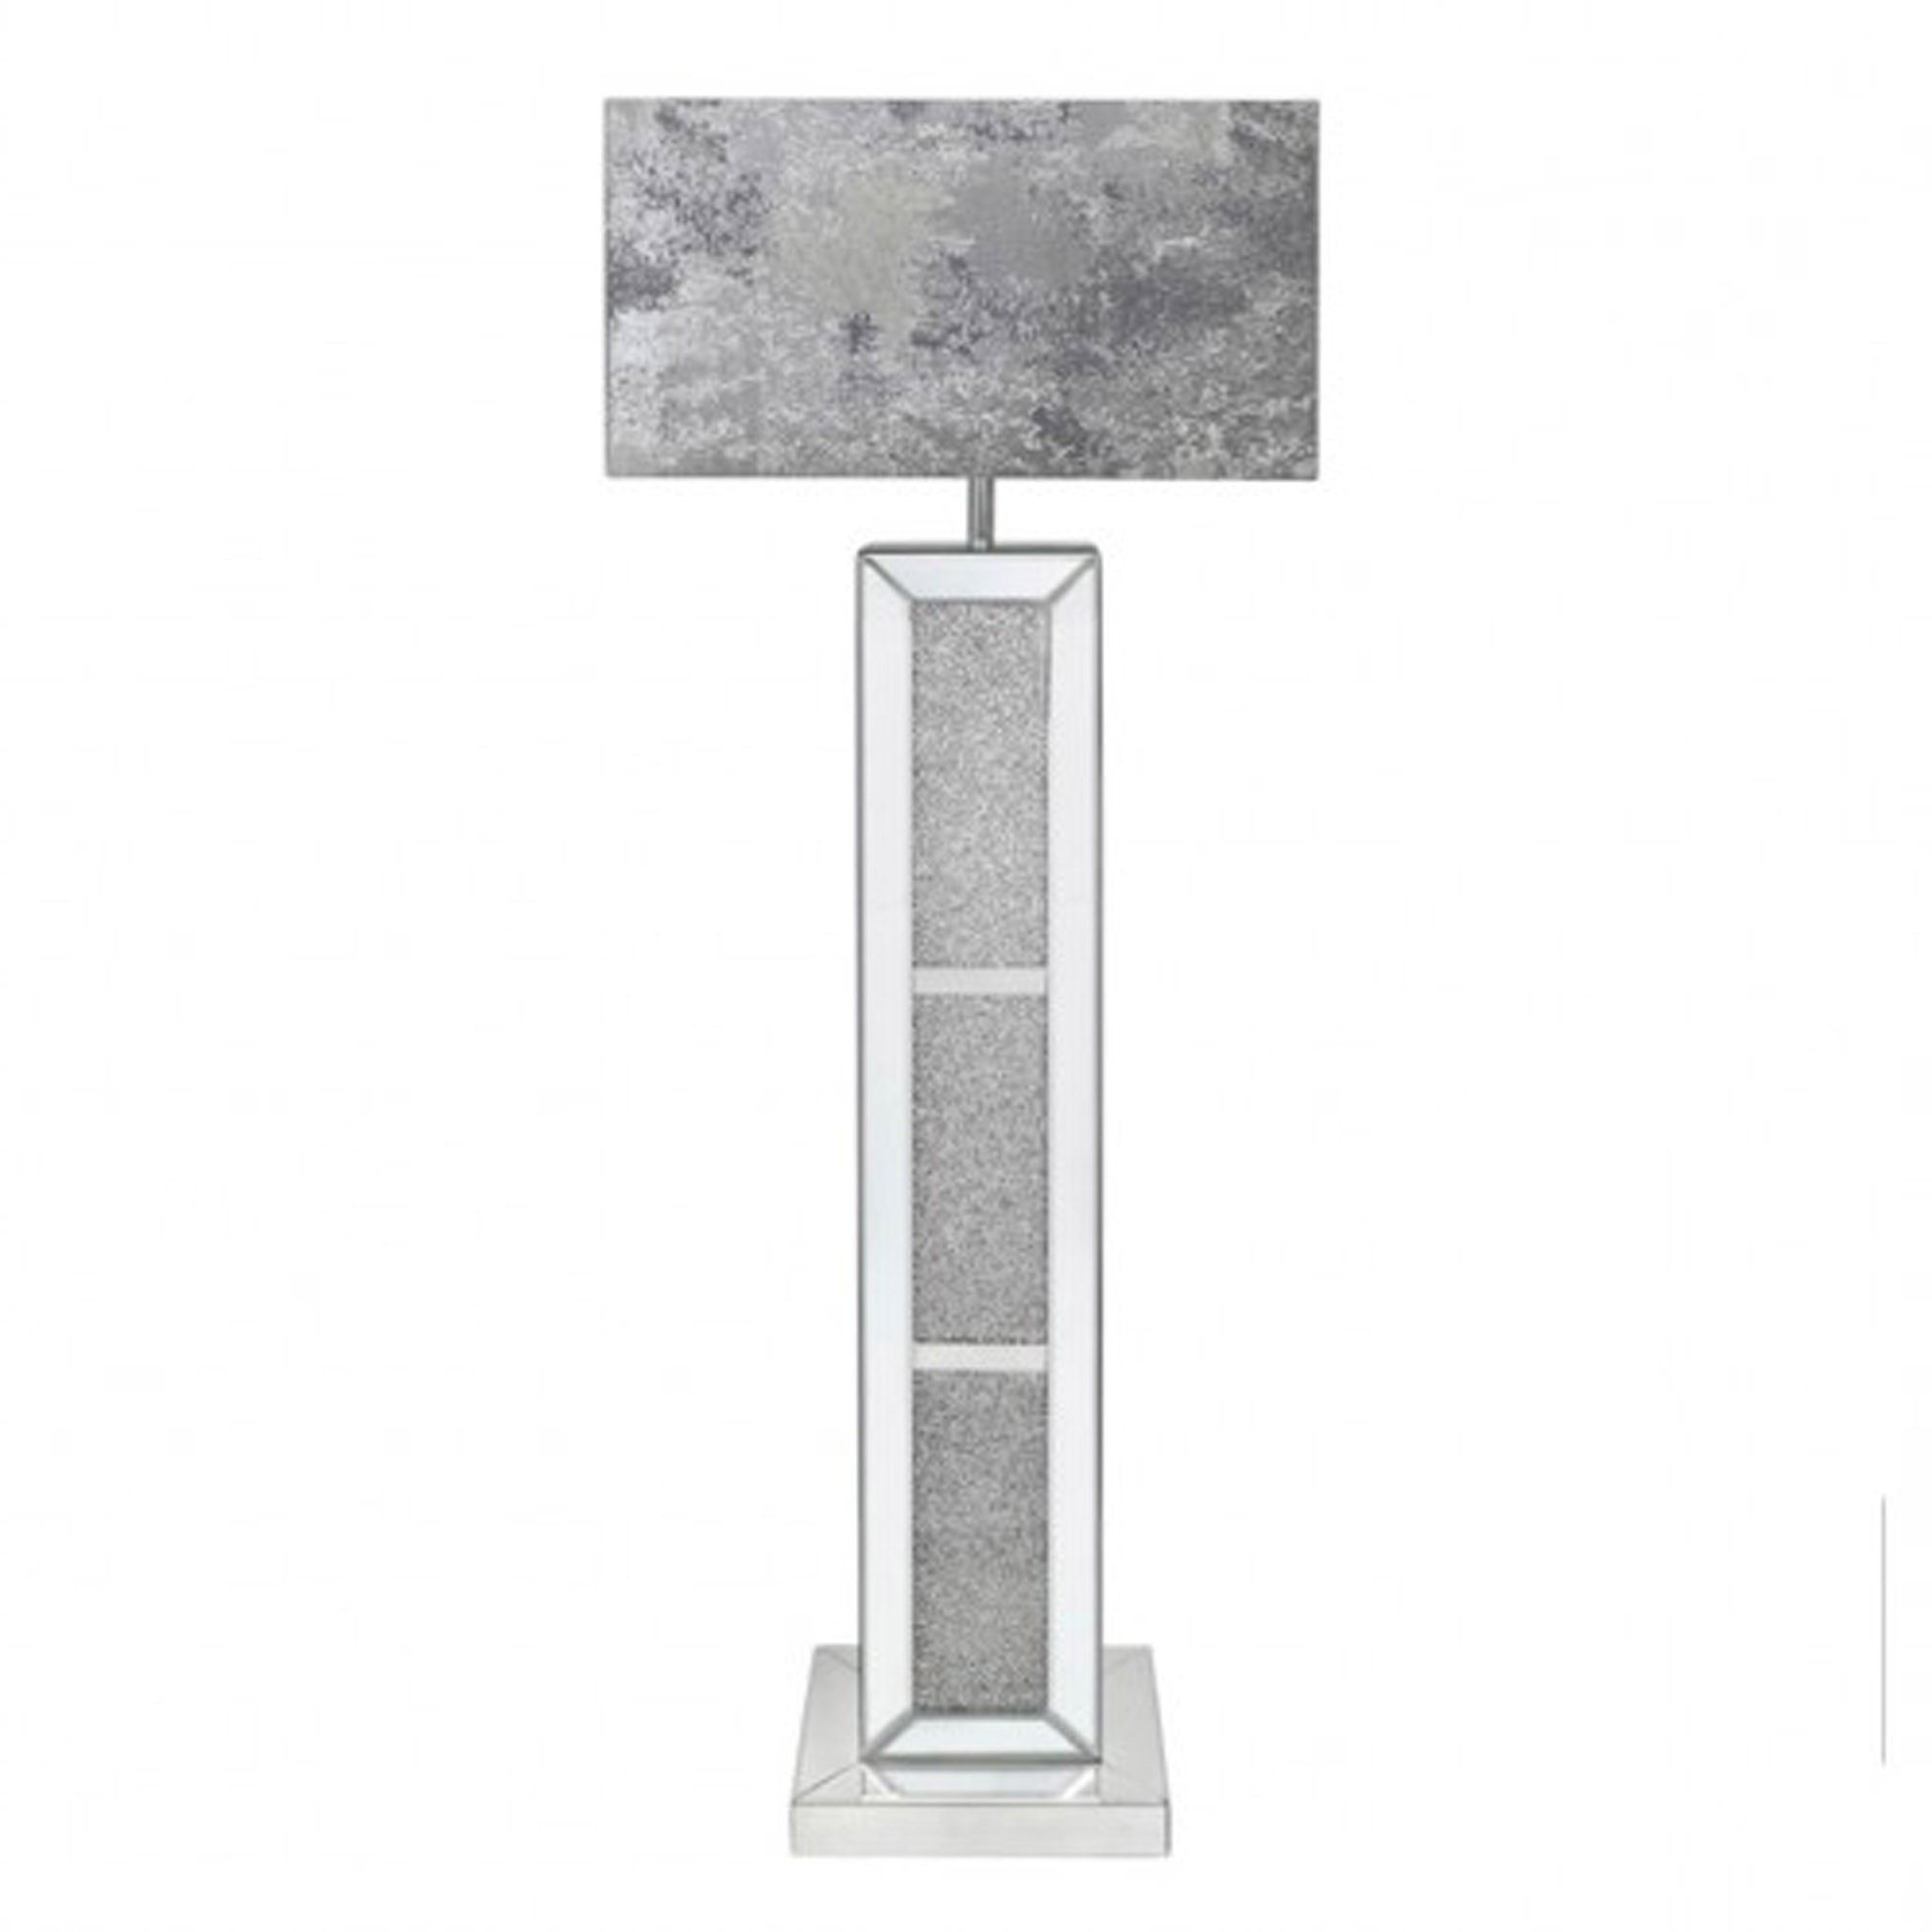 Milano Mirror Floor Lamp With Marble Grey Shade | Floor Standing Lamps For Grey Shade Floor Lamps (View 13 of 20)